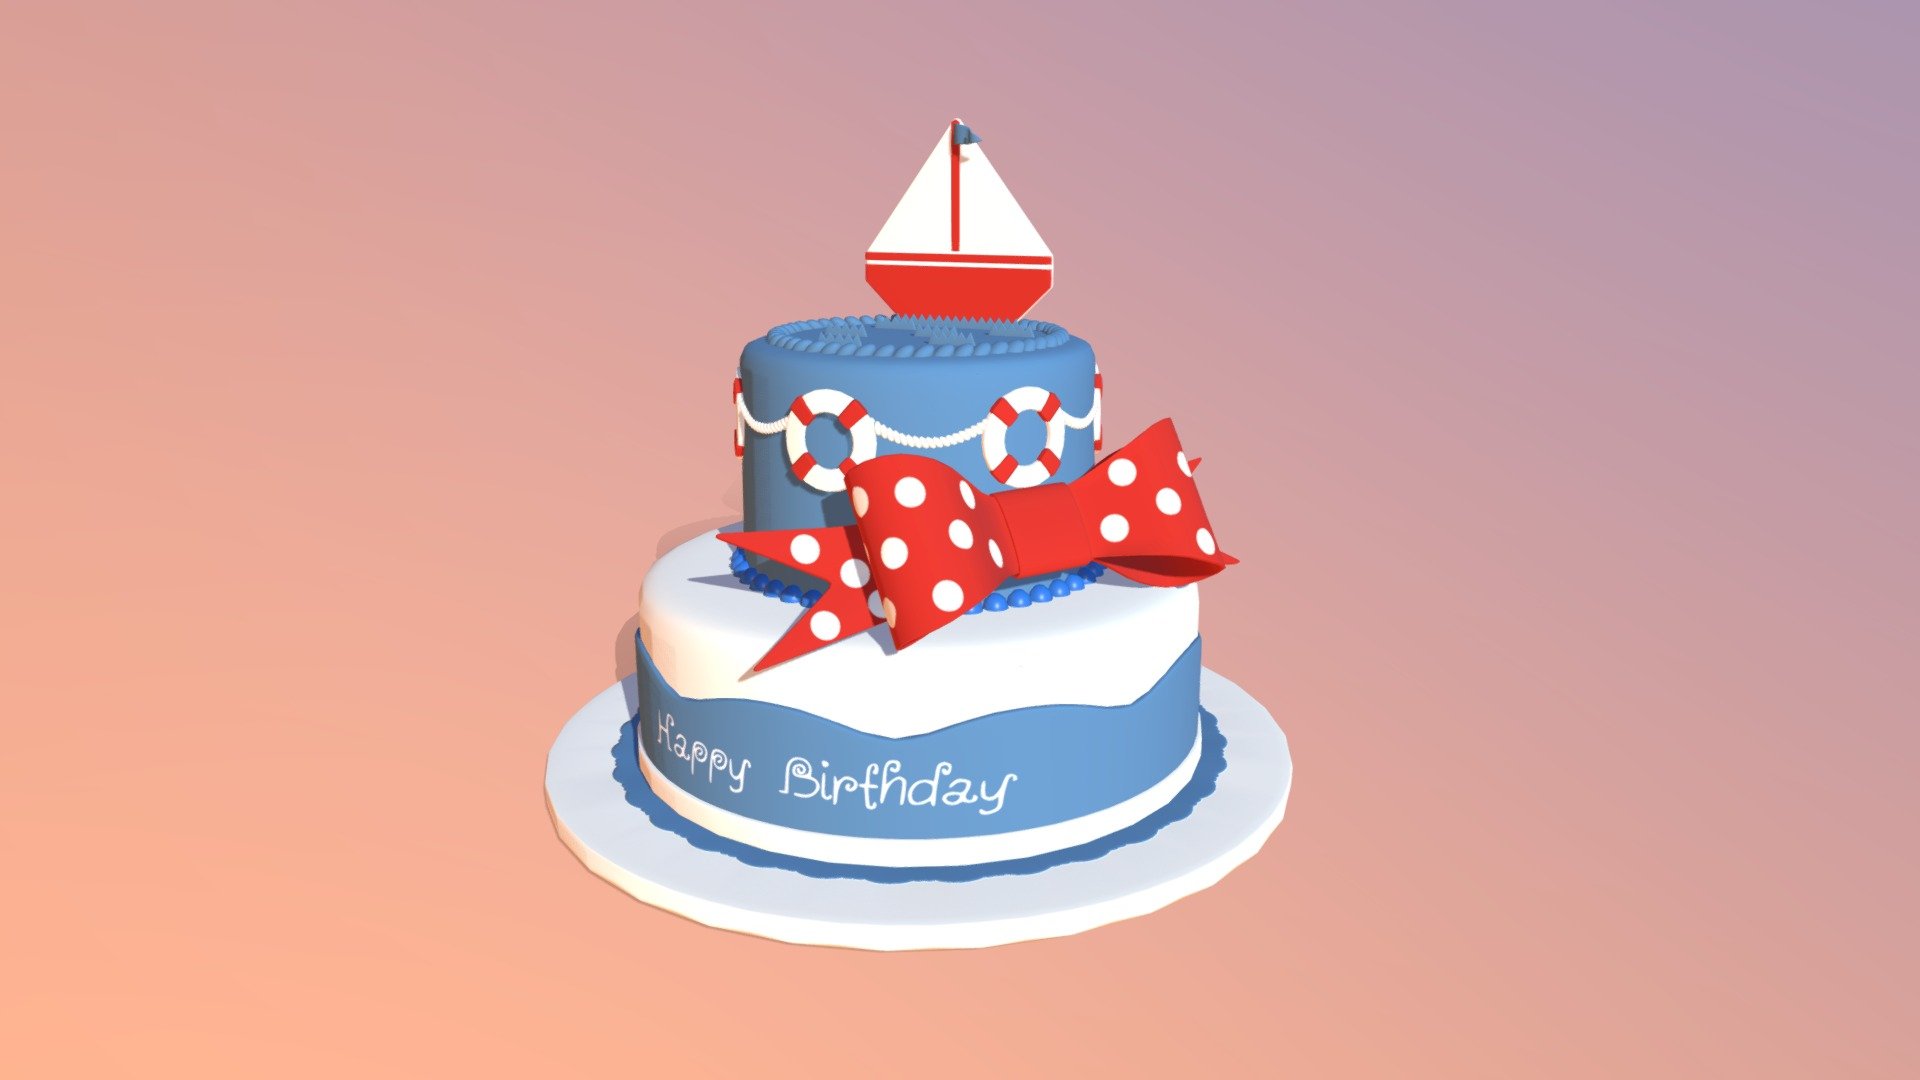 Cake i made for the Sketchfab weekly challenge.

Based on the cake made by Bee Delight Cakes https://www.instagram.com/p/BeUAjVHDfeF/ - Nautical Themed Cake - 3D model by Frank2-1 3d model